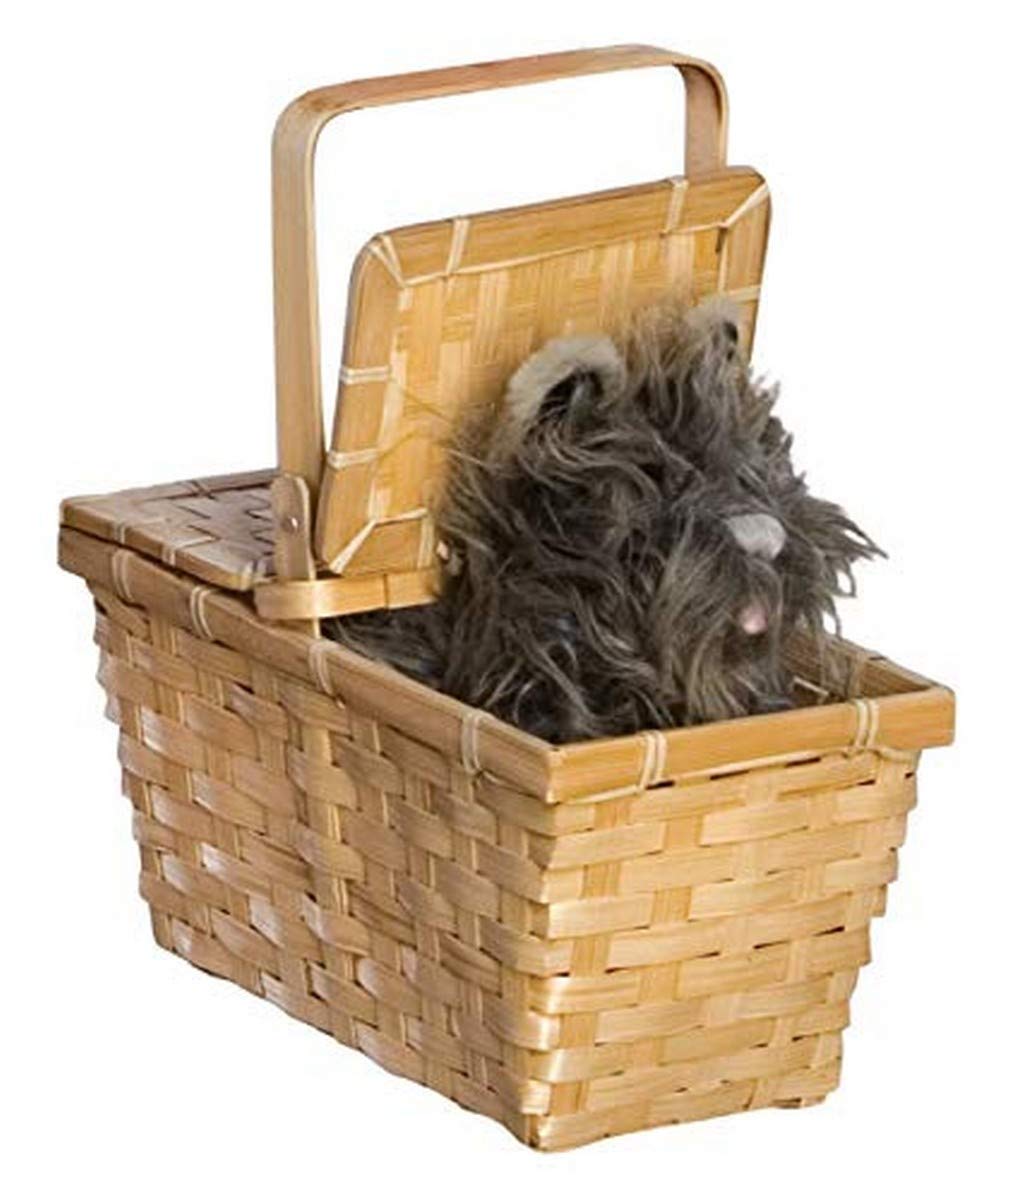 Rubie's Wizard of Oz Dorothy's Toto In A Basket Costume Accessory, 10 x 7 x 5 inches